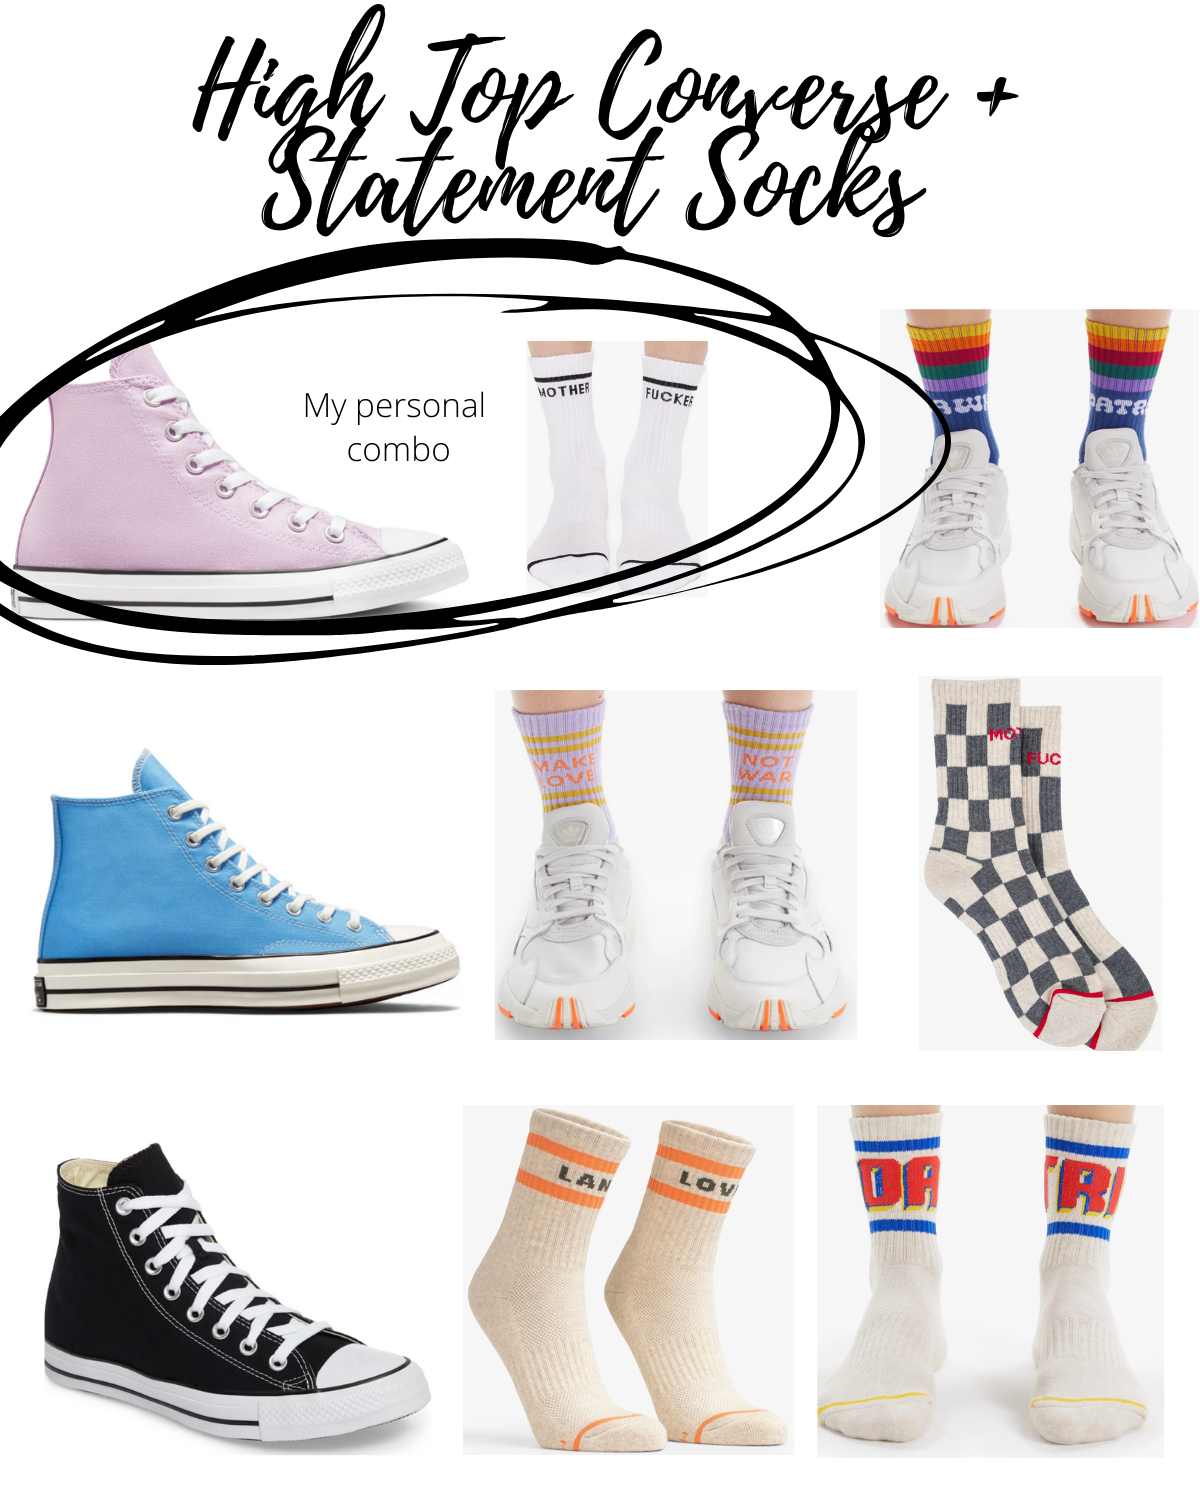 High Top Converse and statement socks shopping collage.